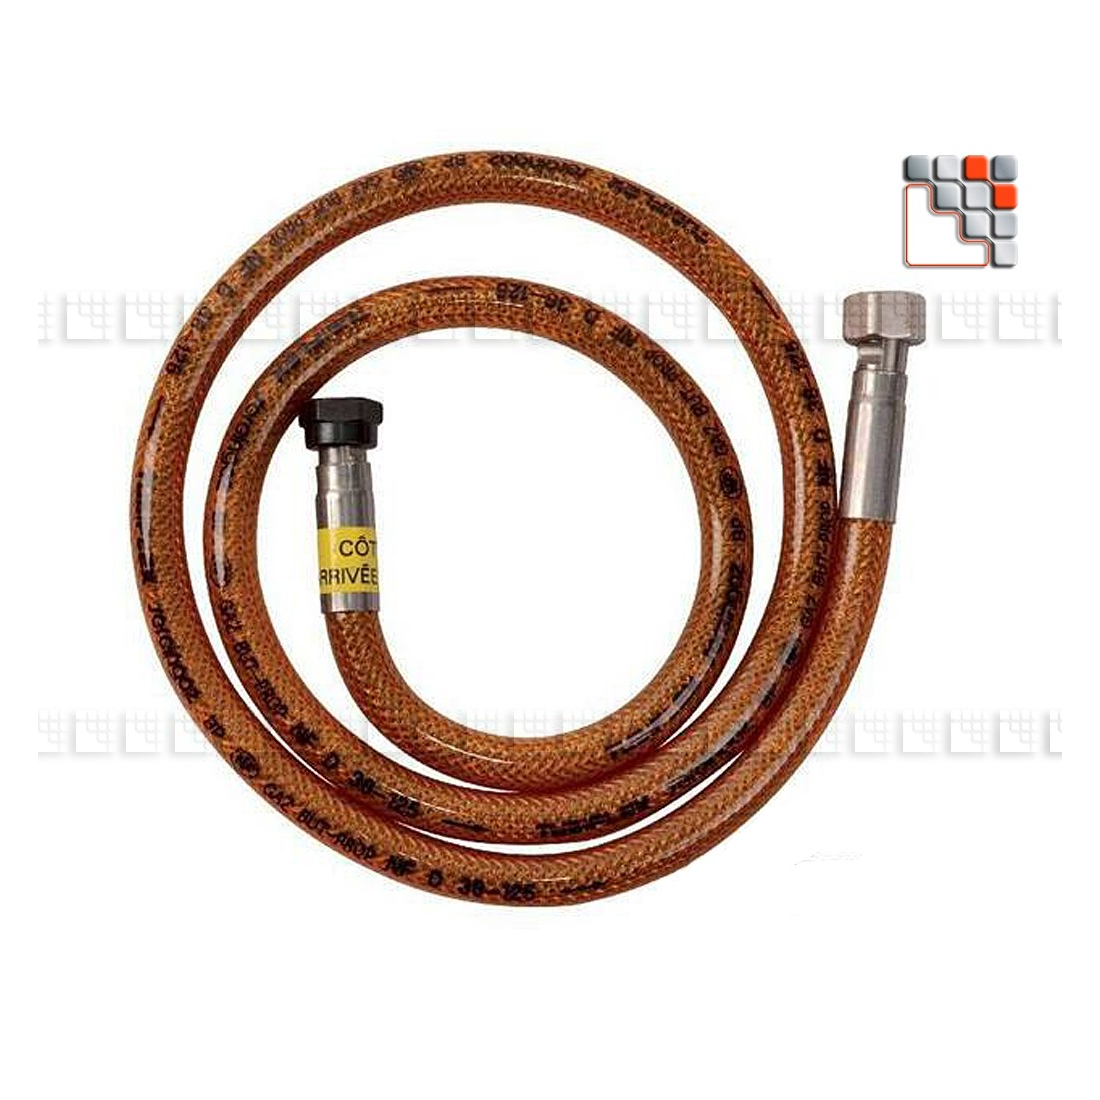 Stainless Steel Butane Propane Gas Hose C06-H2602G Clesse industries¨ Gas Accessories